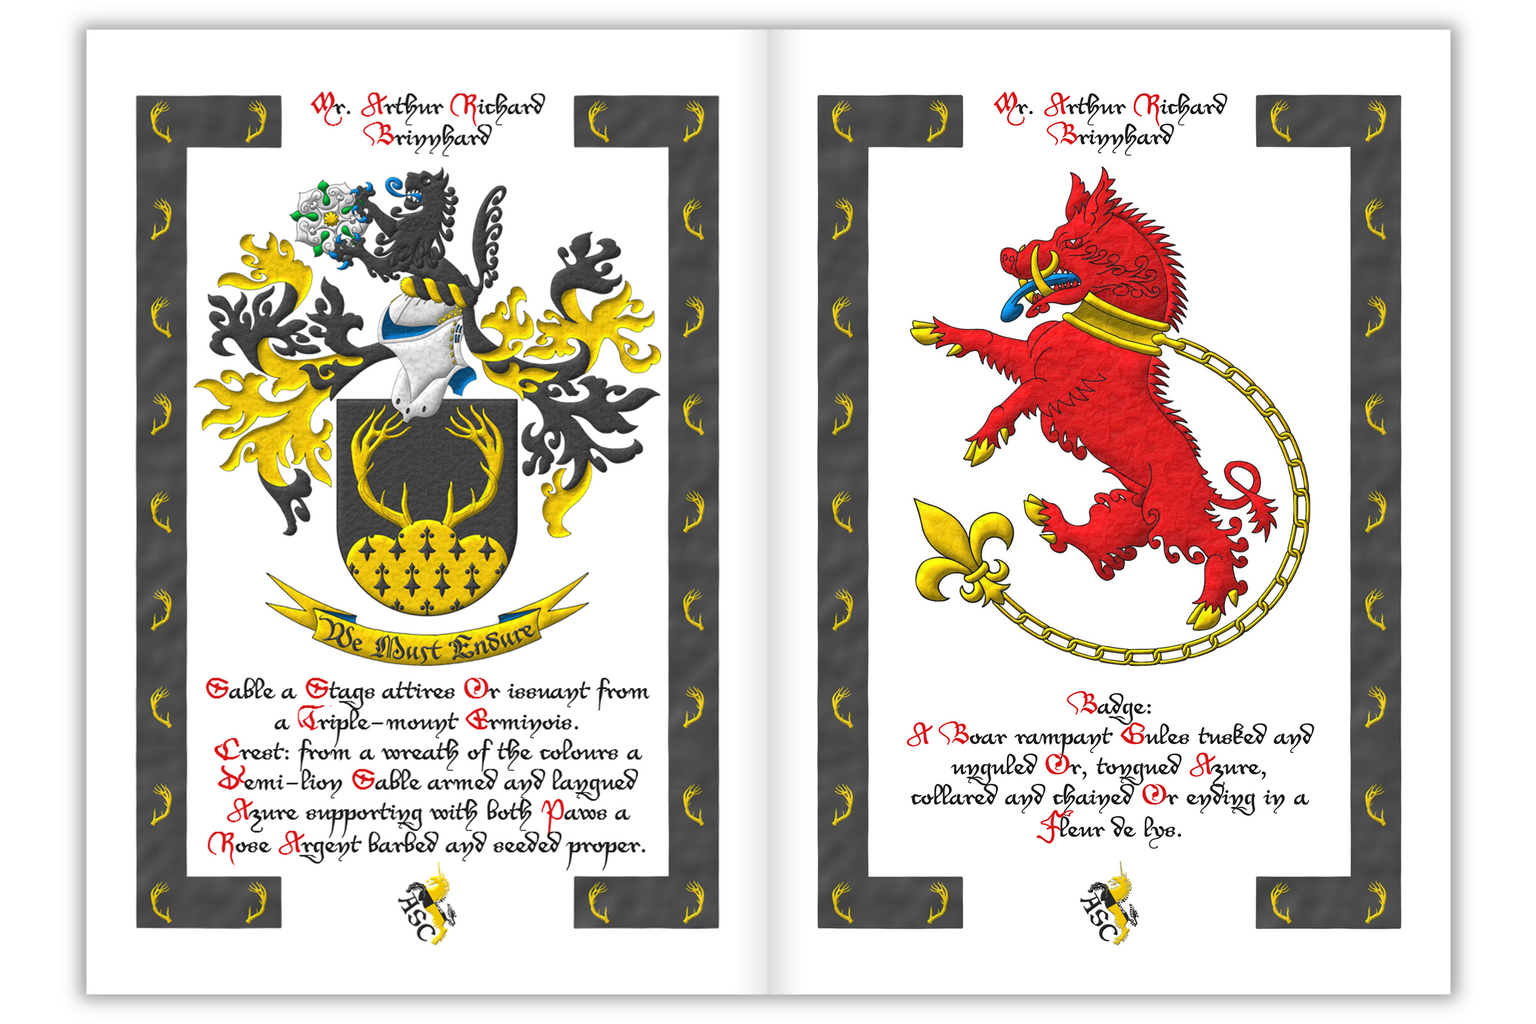 2 pages of the heraldic document for the arms and heraldic badge of Arthur Richard Brinnhard emblazoned and edited by me. The pages have a heraldic frame with the stags' attires of his coat of arms.